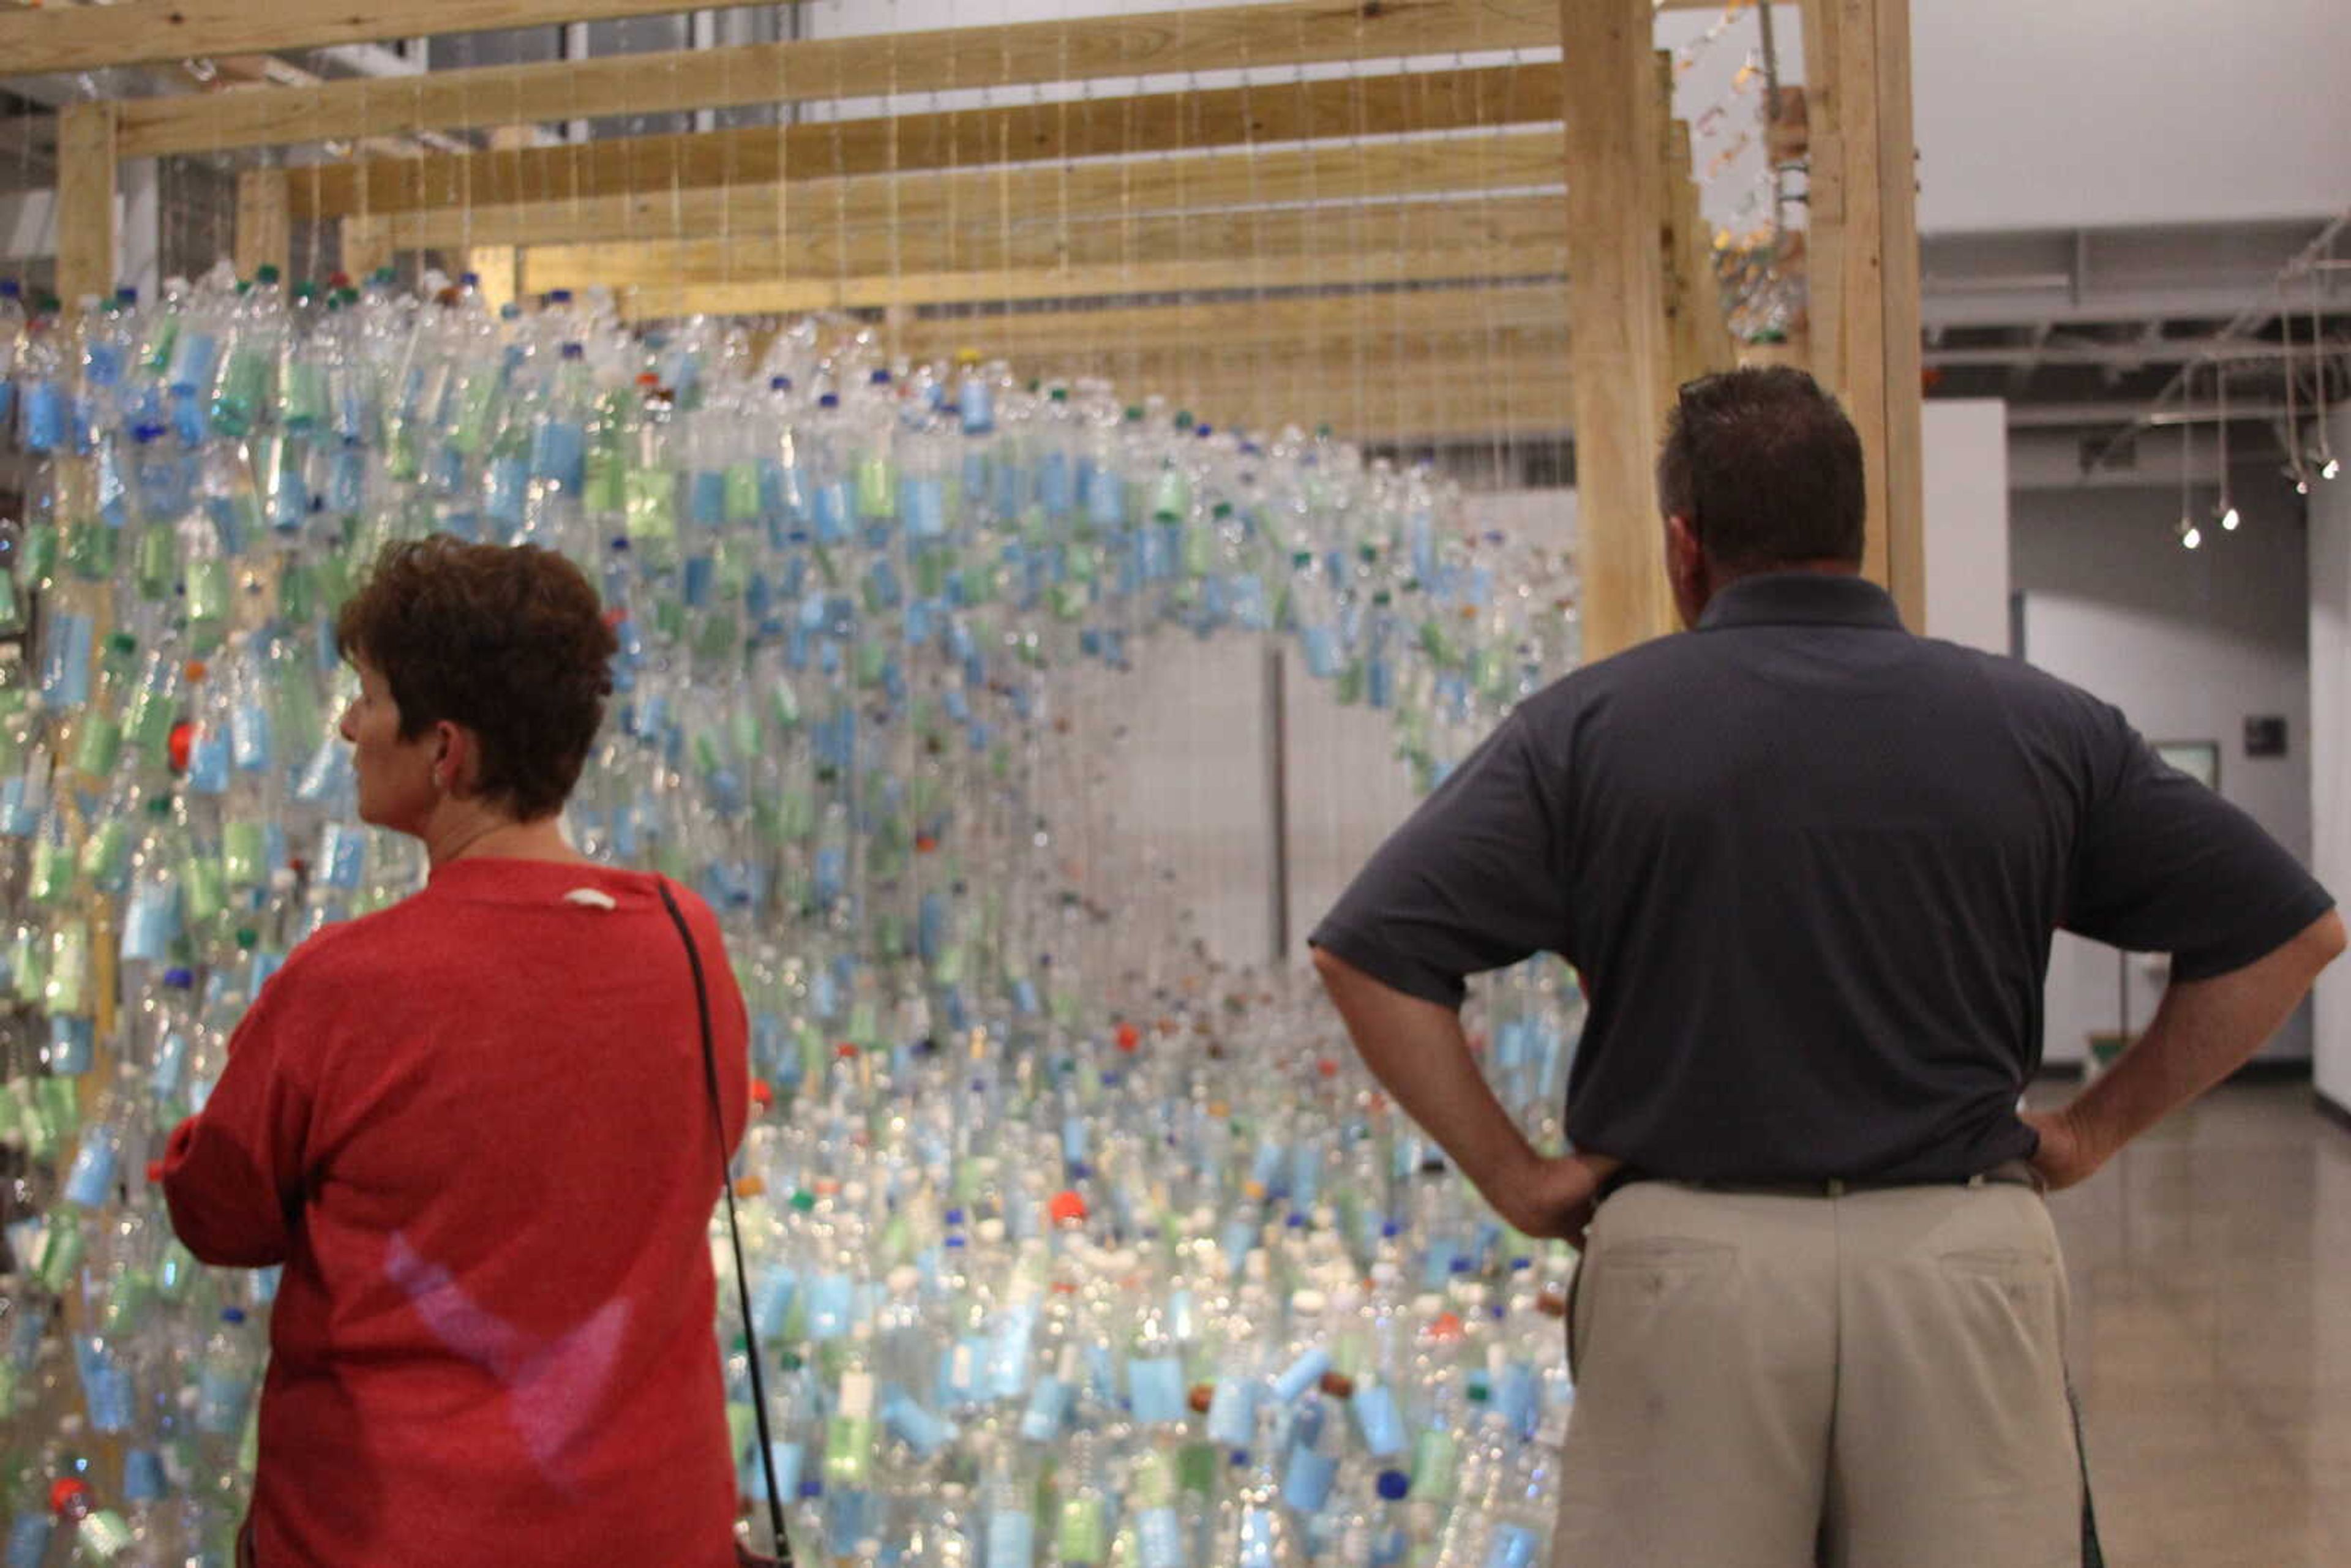 Patrons observe Kevin Hand’s “Wave of Emotion” at Catapult Creative House on Sept. 7.